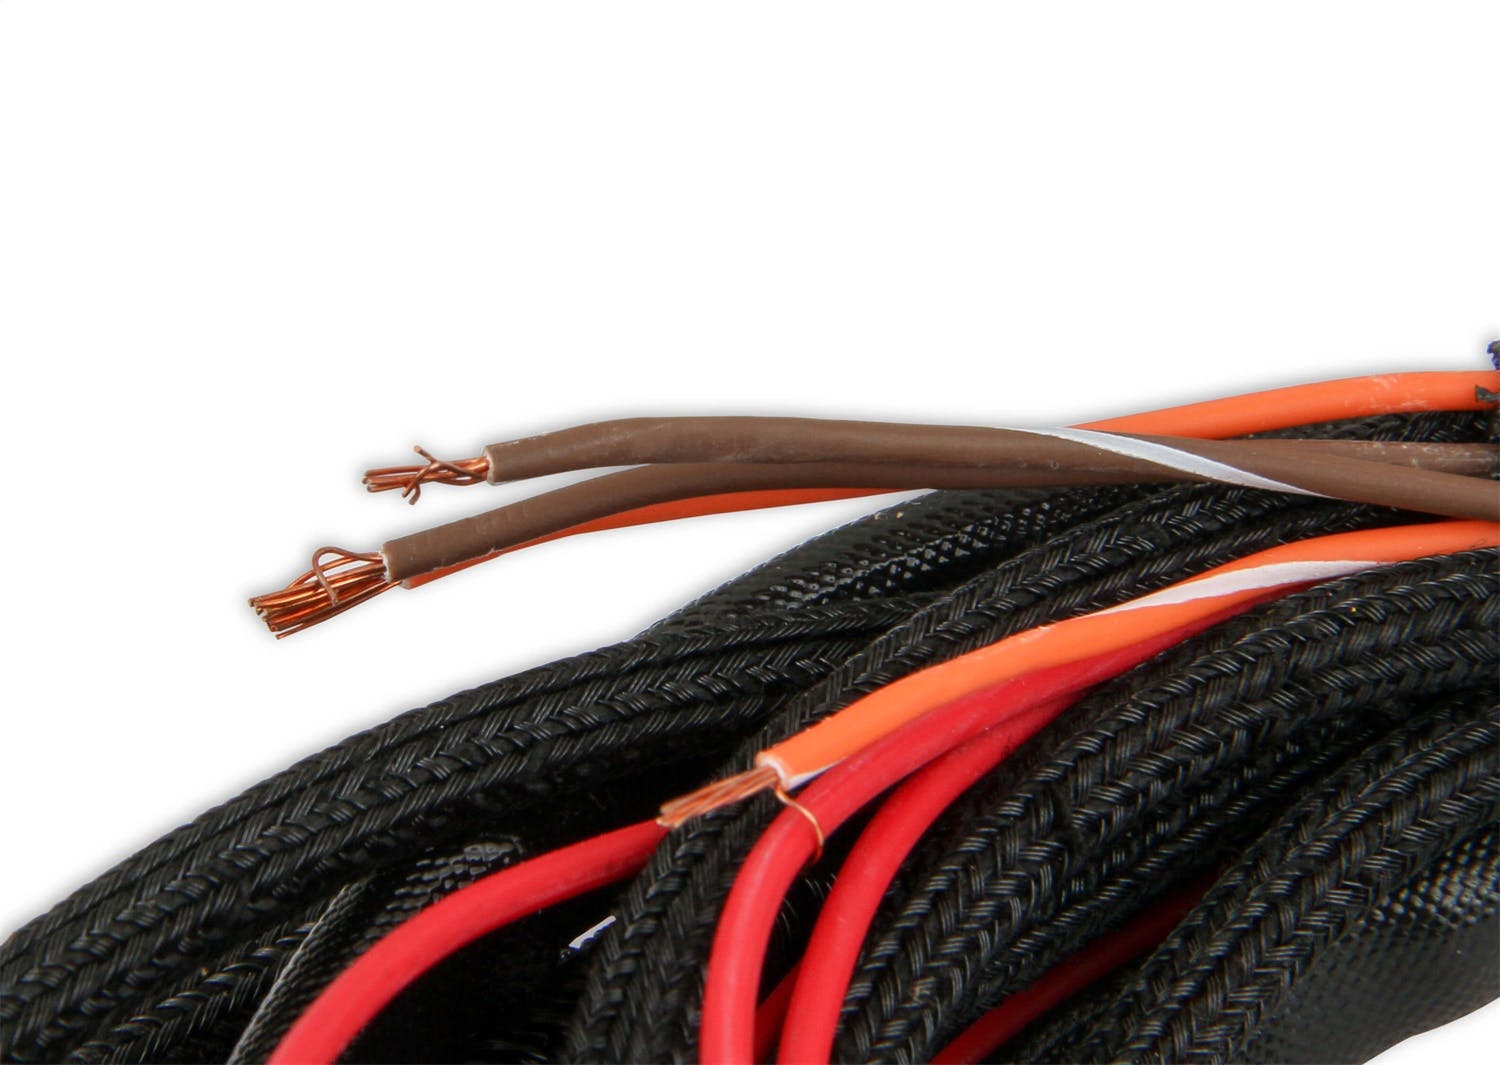 MSD Performance 2266 Main Harness Replacement,7766